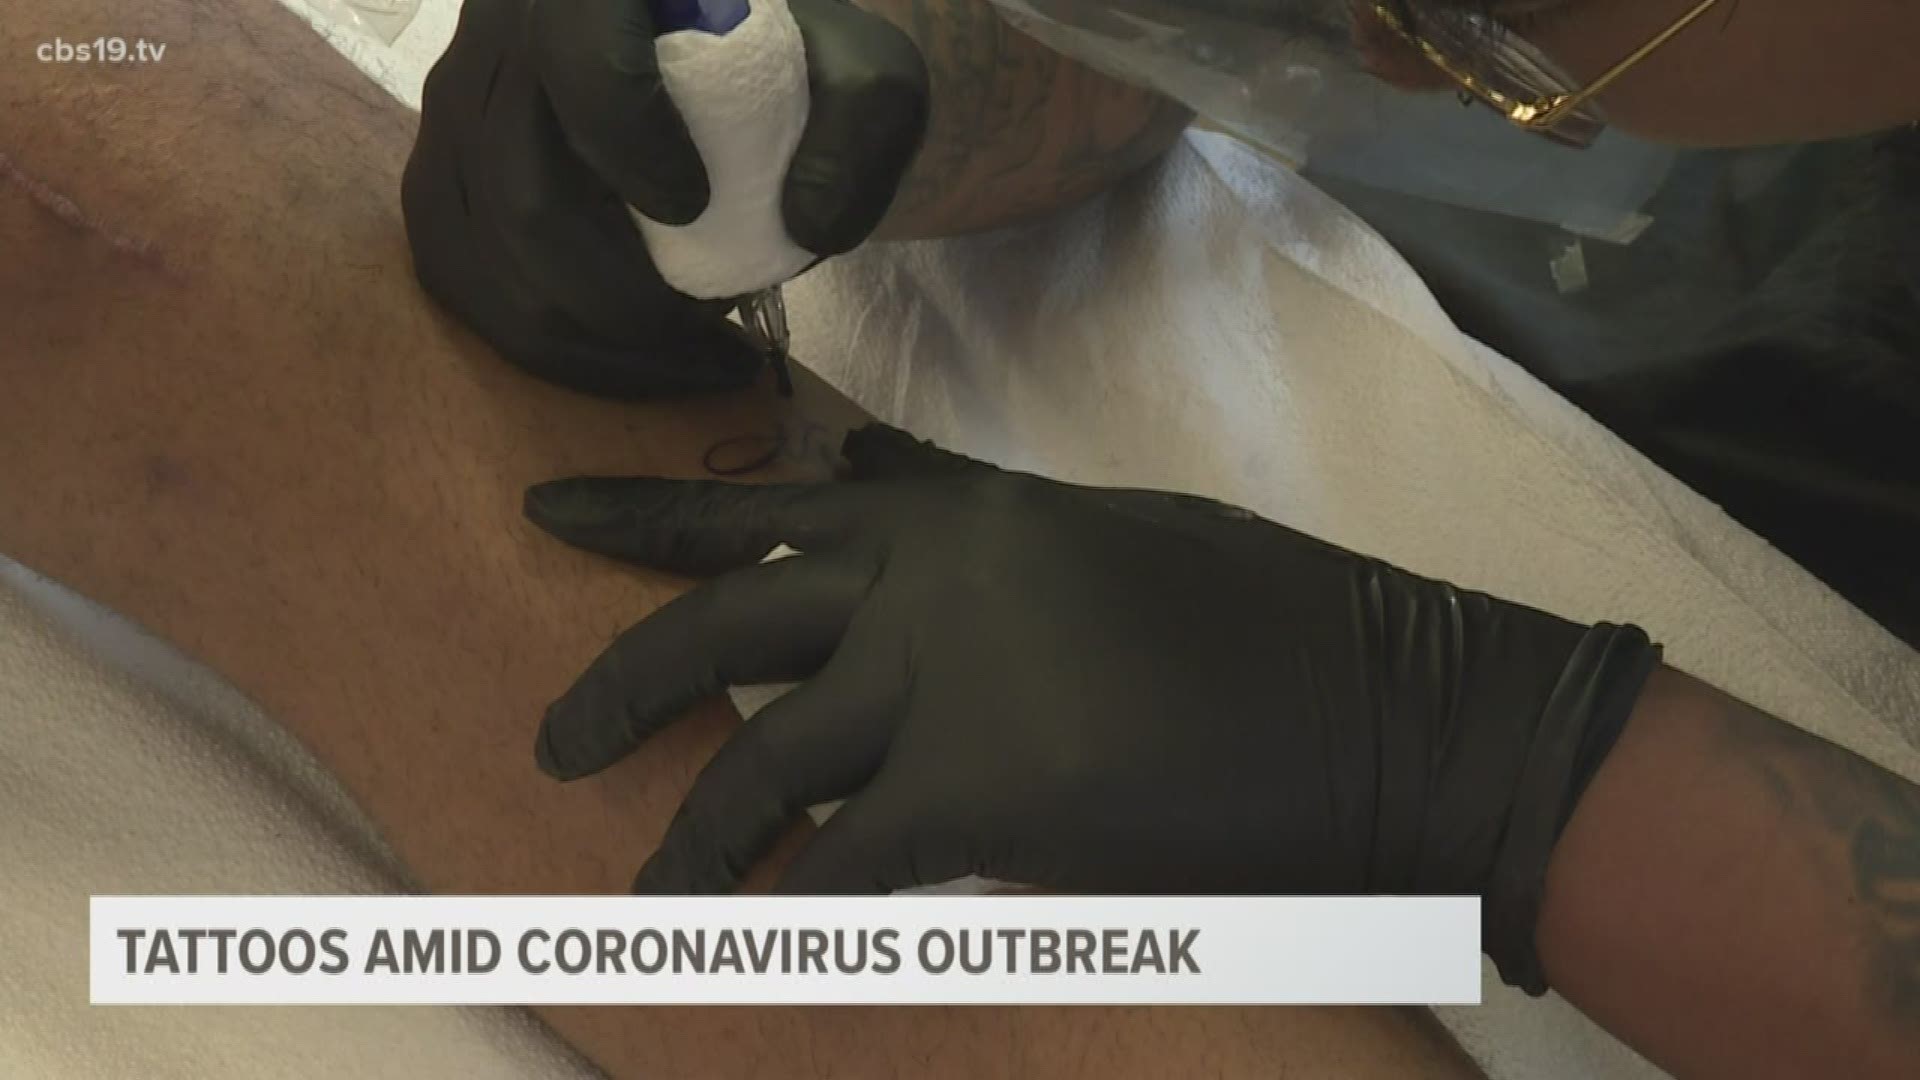 Friday the 13th is one of the busiest days for tattoo shops, but how is a local shop preparing with the COVID-19 outbreak?